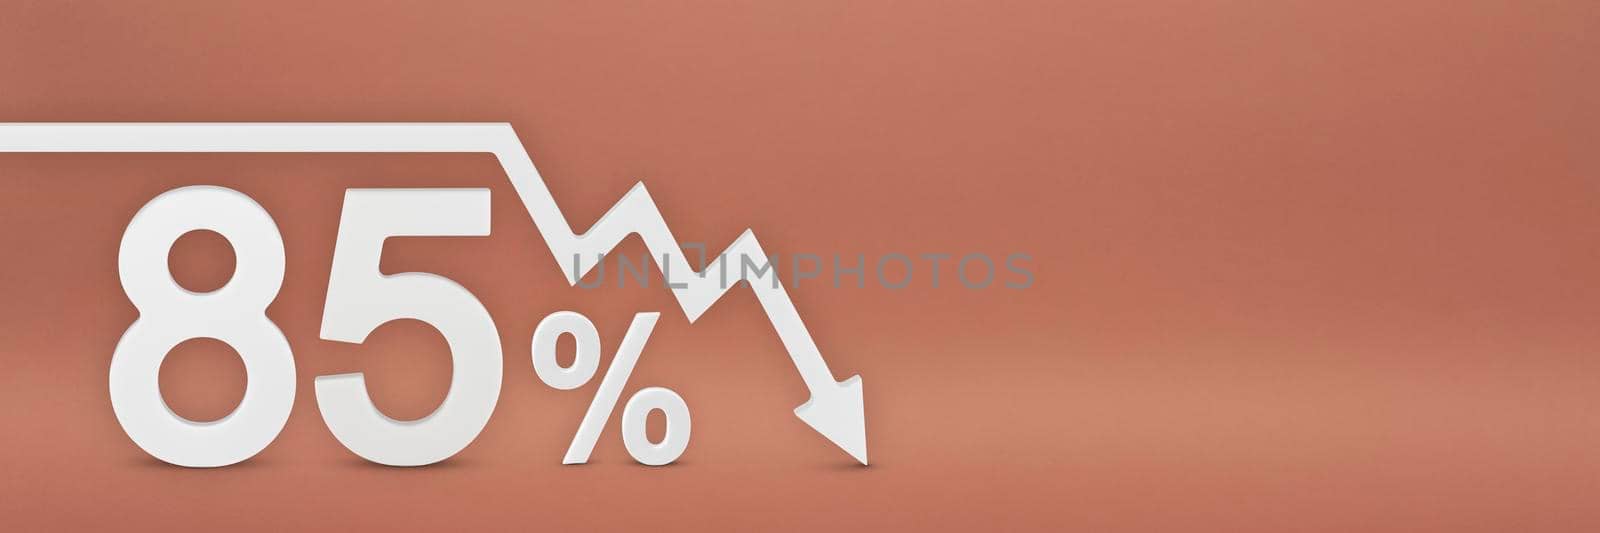 eighty-five percent, the arrow on the graph is pointing down. Stock market crash, bear market, inflation.Economic collapse, collapse of stocks.3d banner,85 percent discount sign on a red background